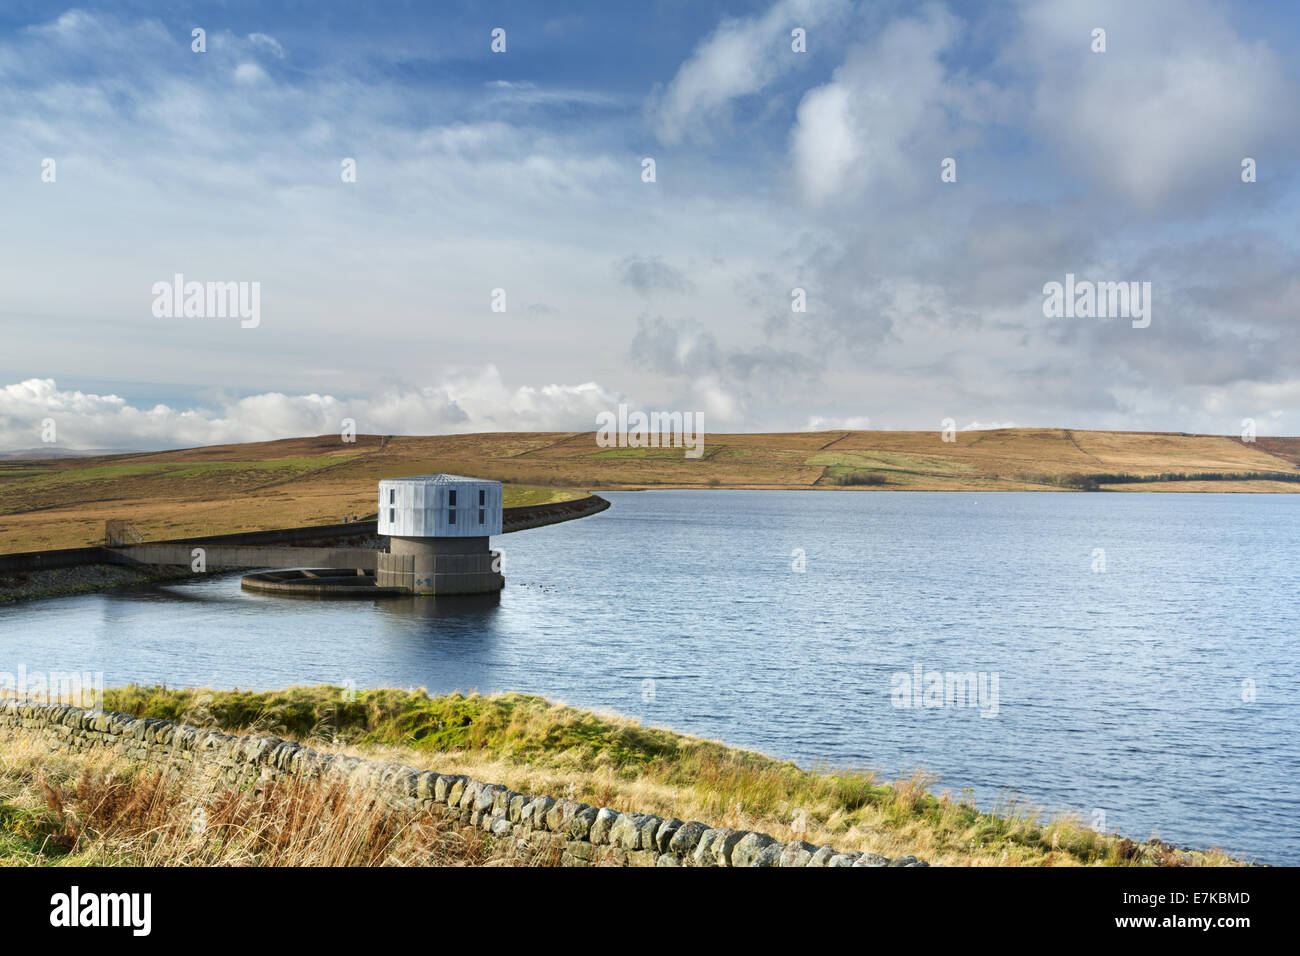 Grimwith Reservoir in Wharfedale, North Yorkshire, England Stockfoto